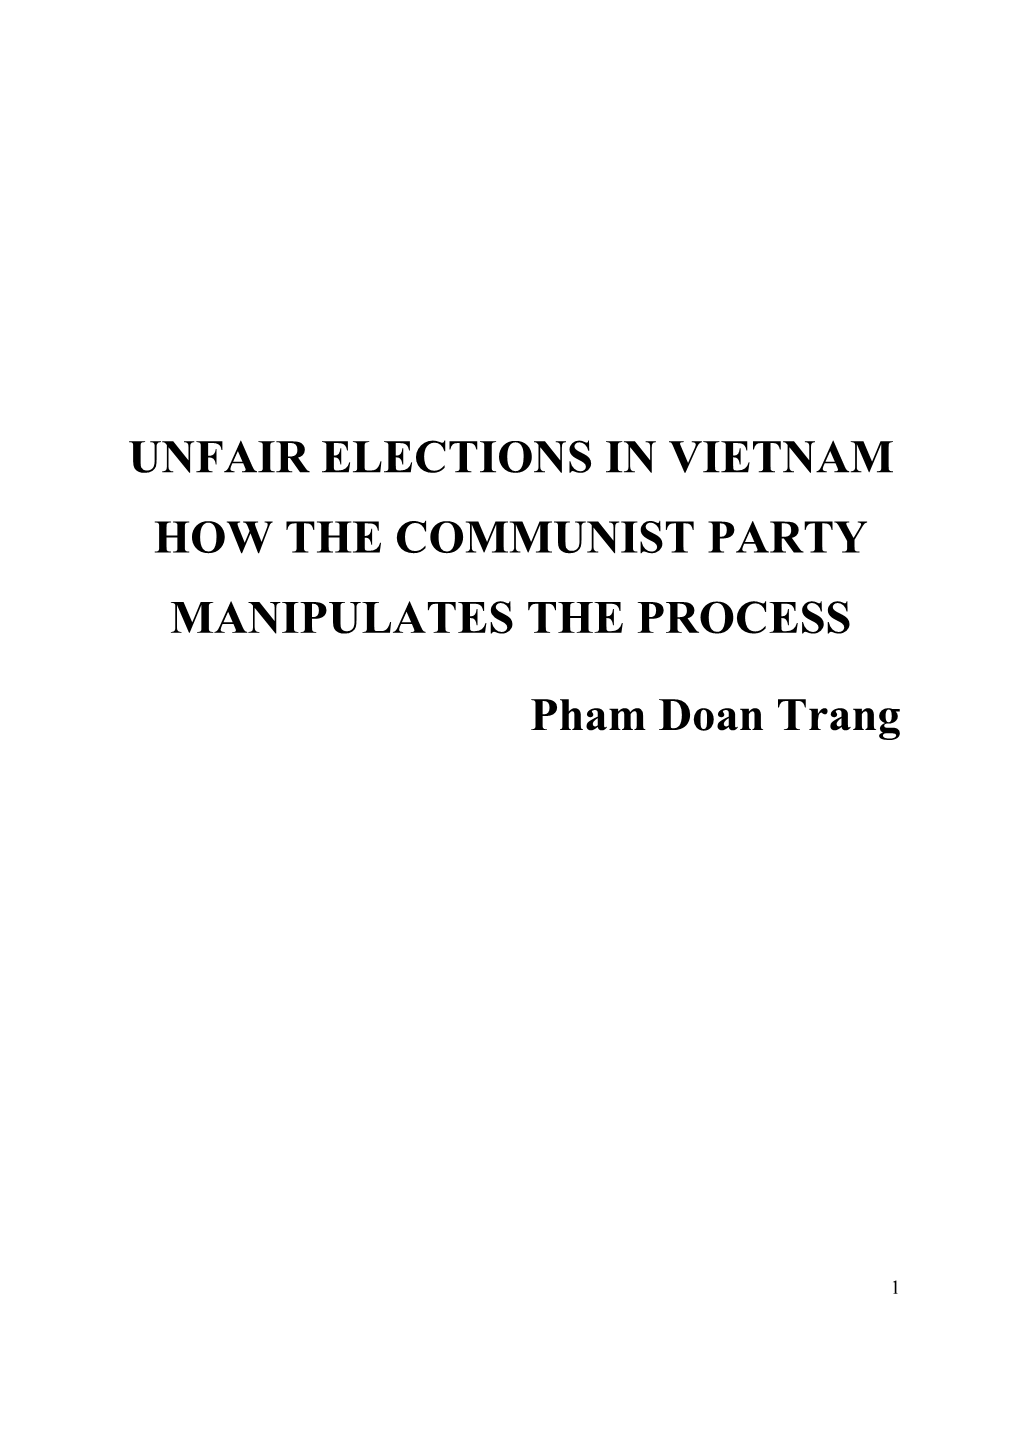 Unfair Elections in Vietnam How the Communist Party Manipulates the Process